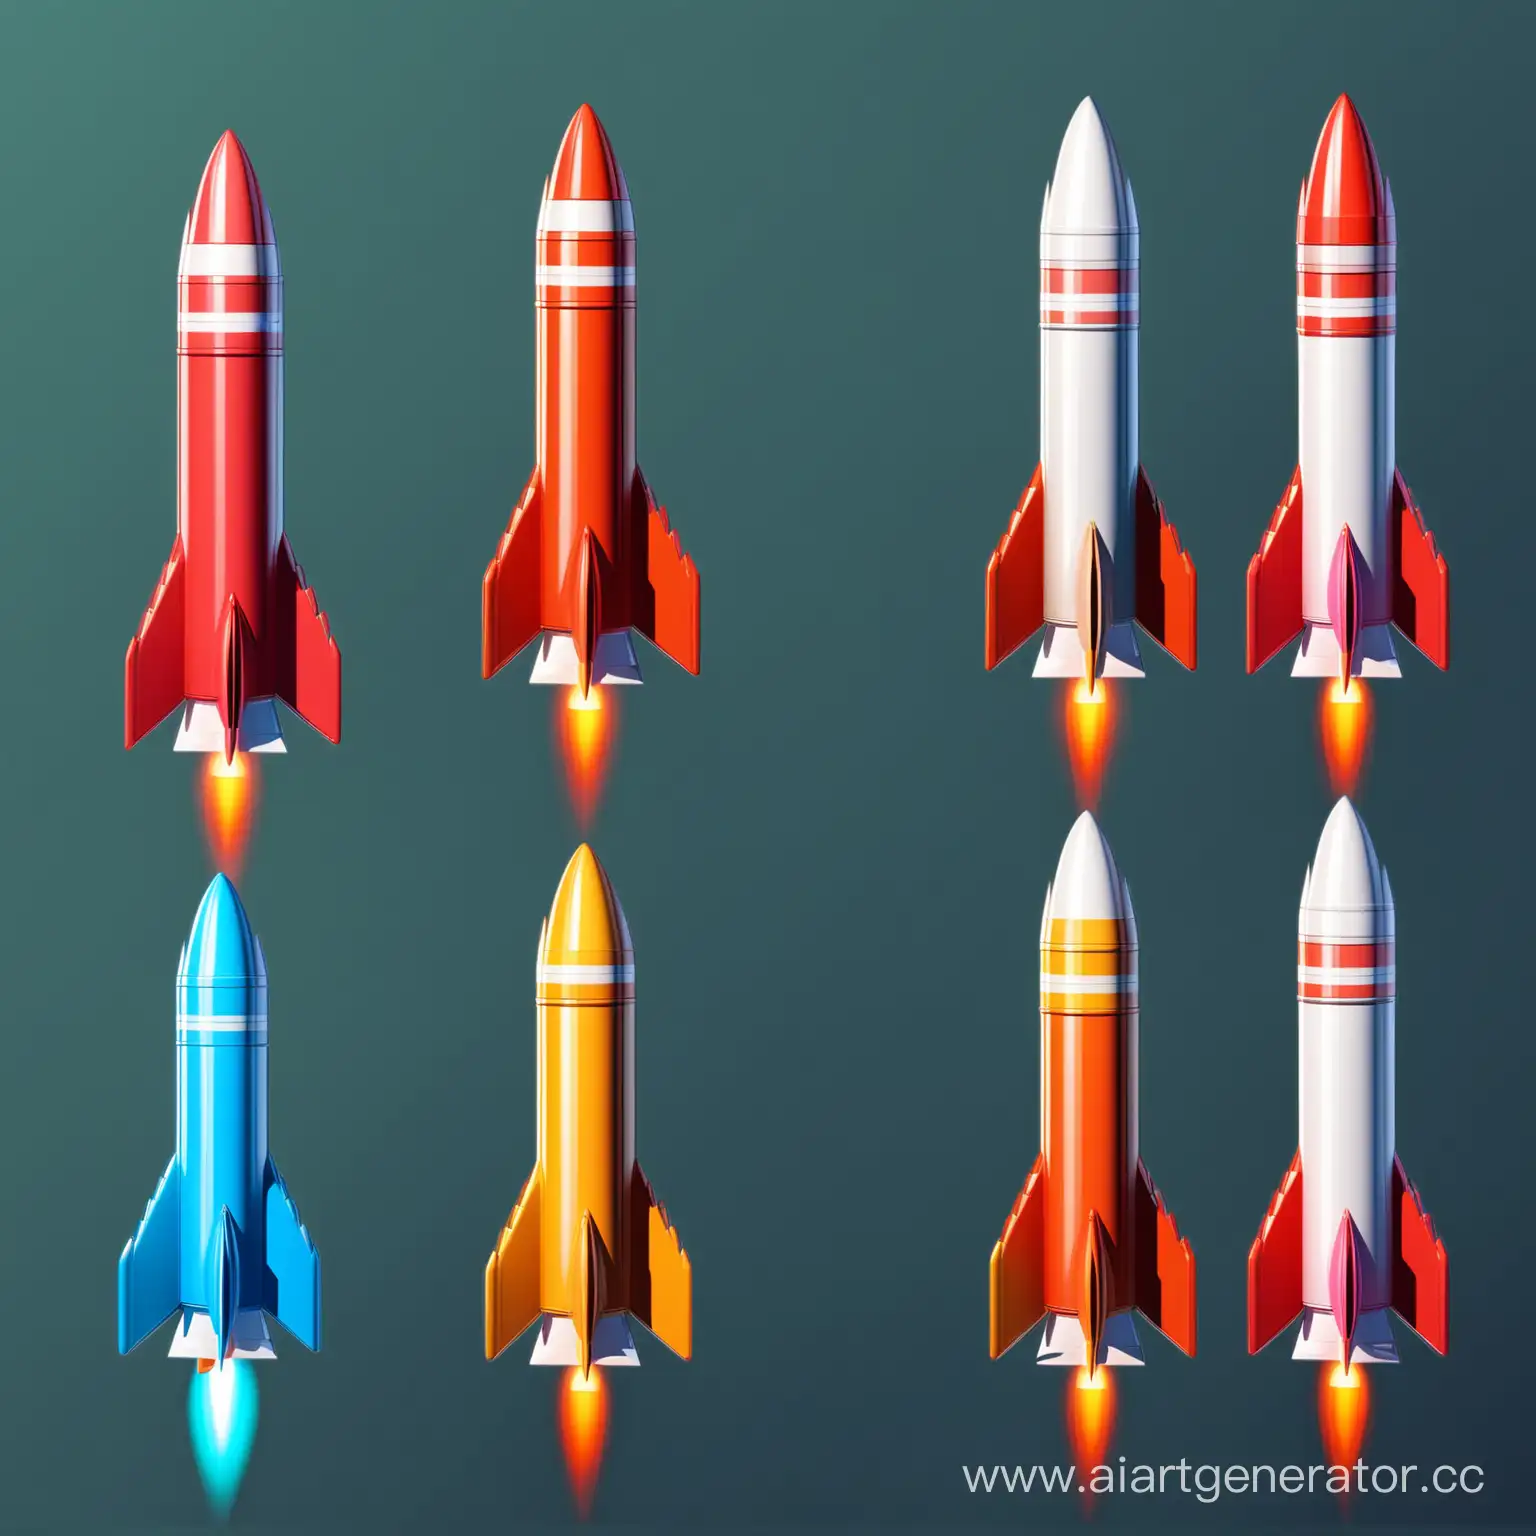 3D-Rocket-Game-Adventure-in-Diverse-Styles